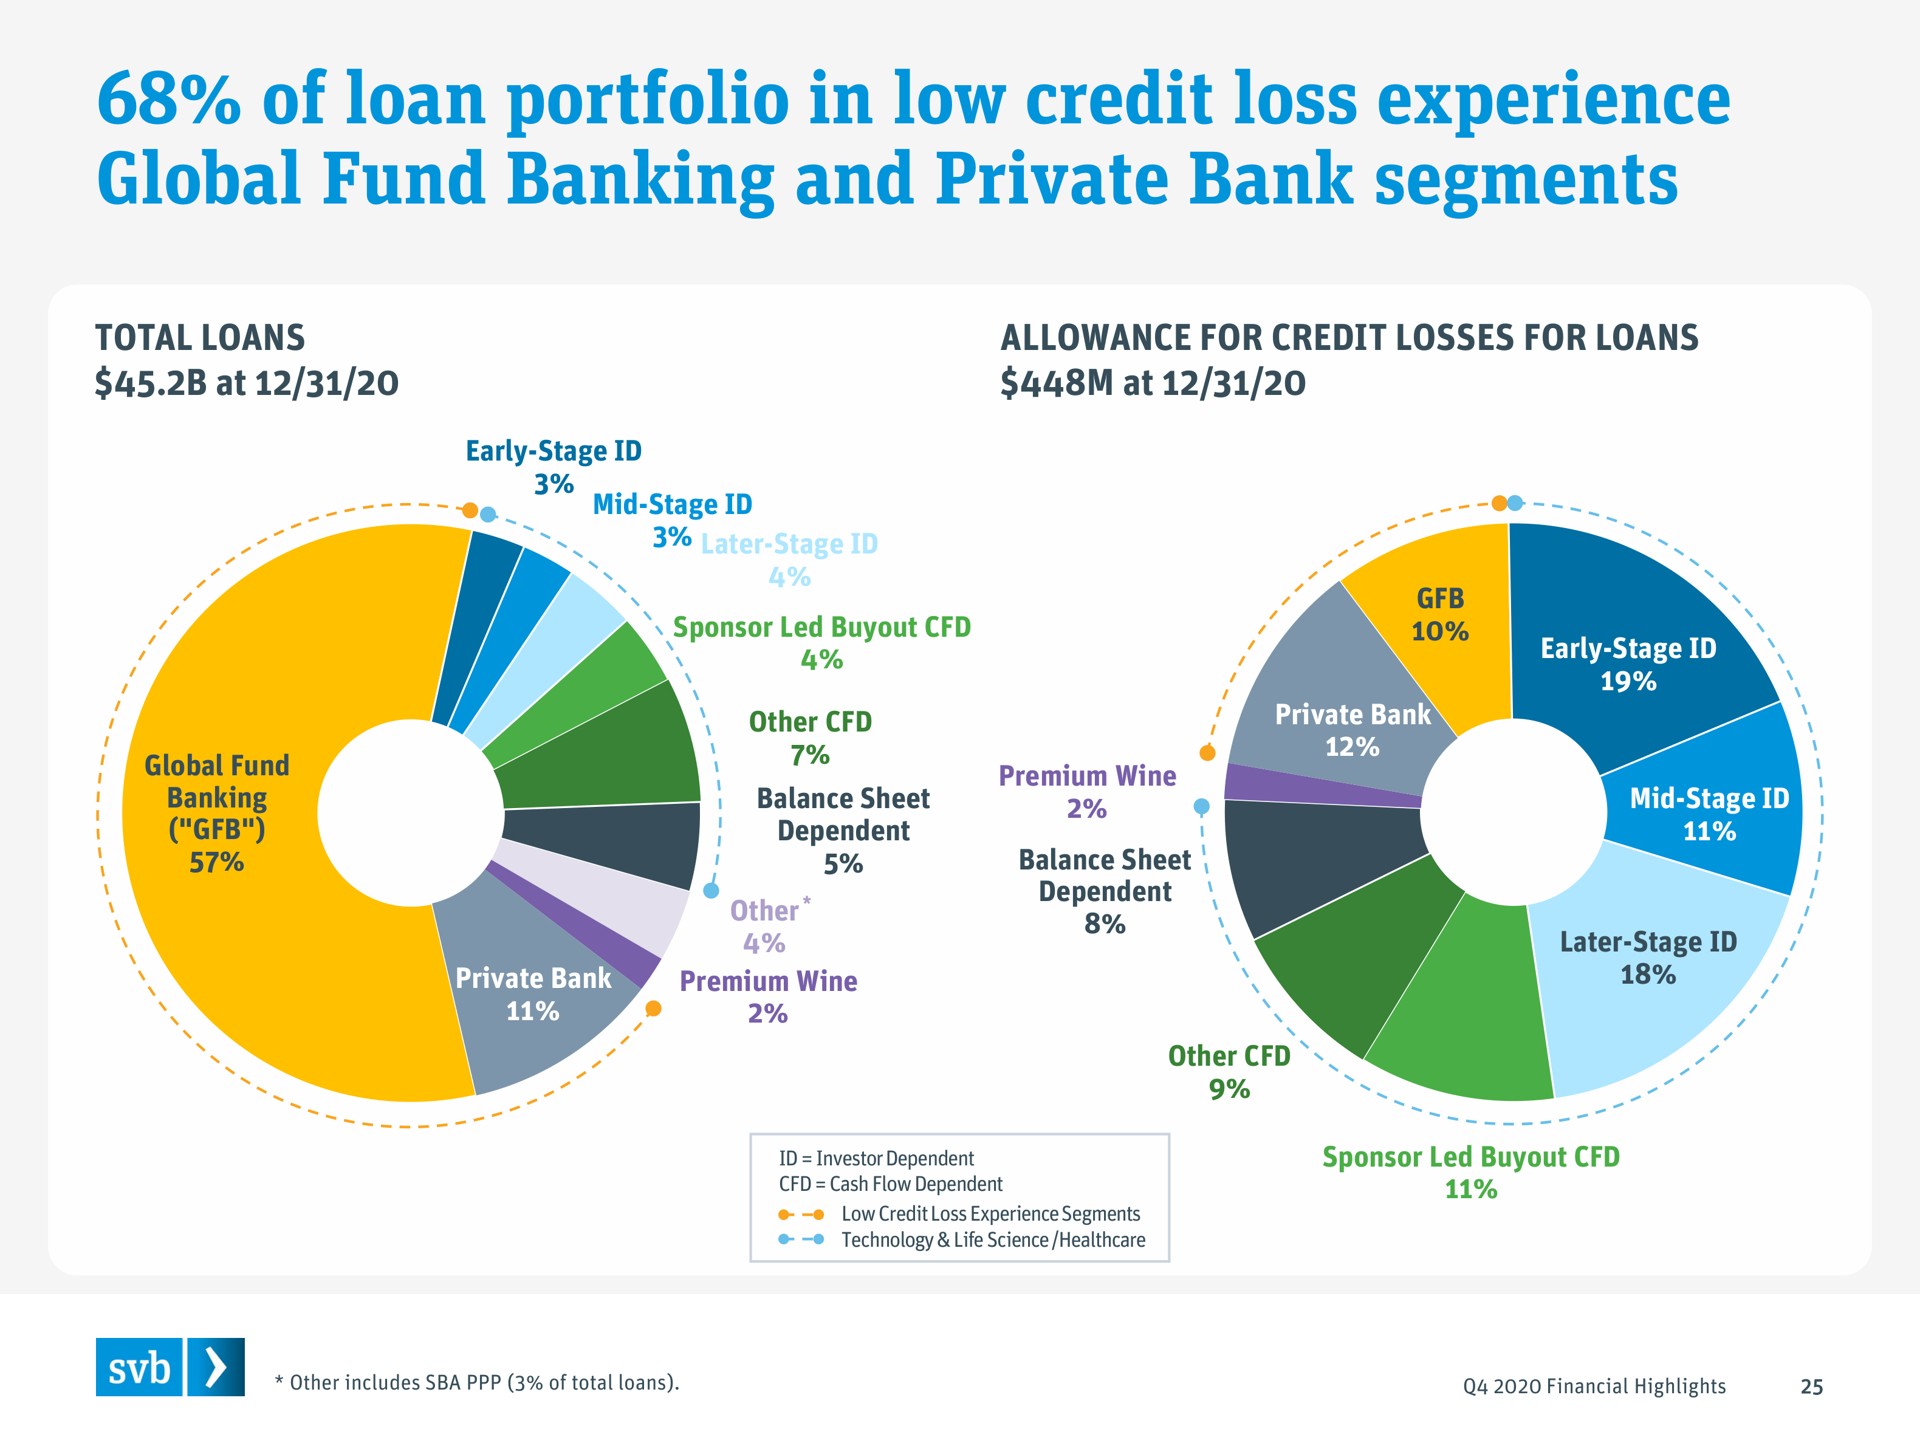 of loan portfolio in low credit loss experience global fund banking and private bank segments | Silicon Valley Bank